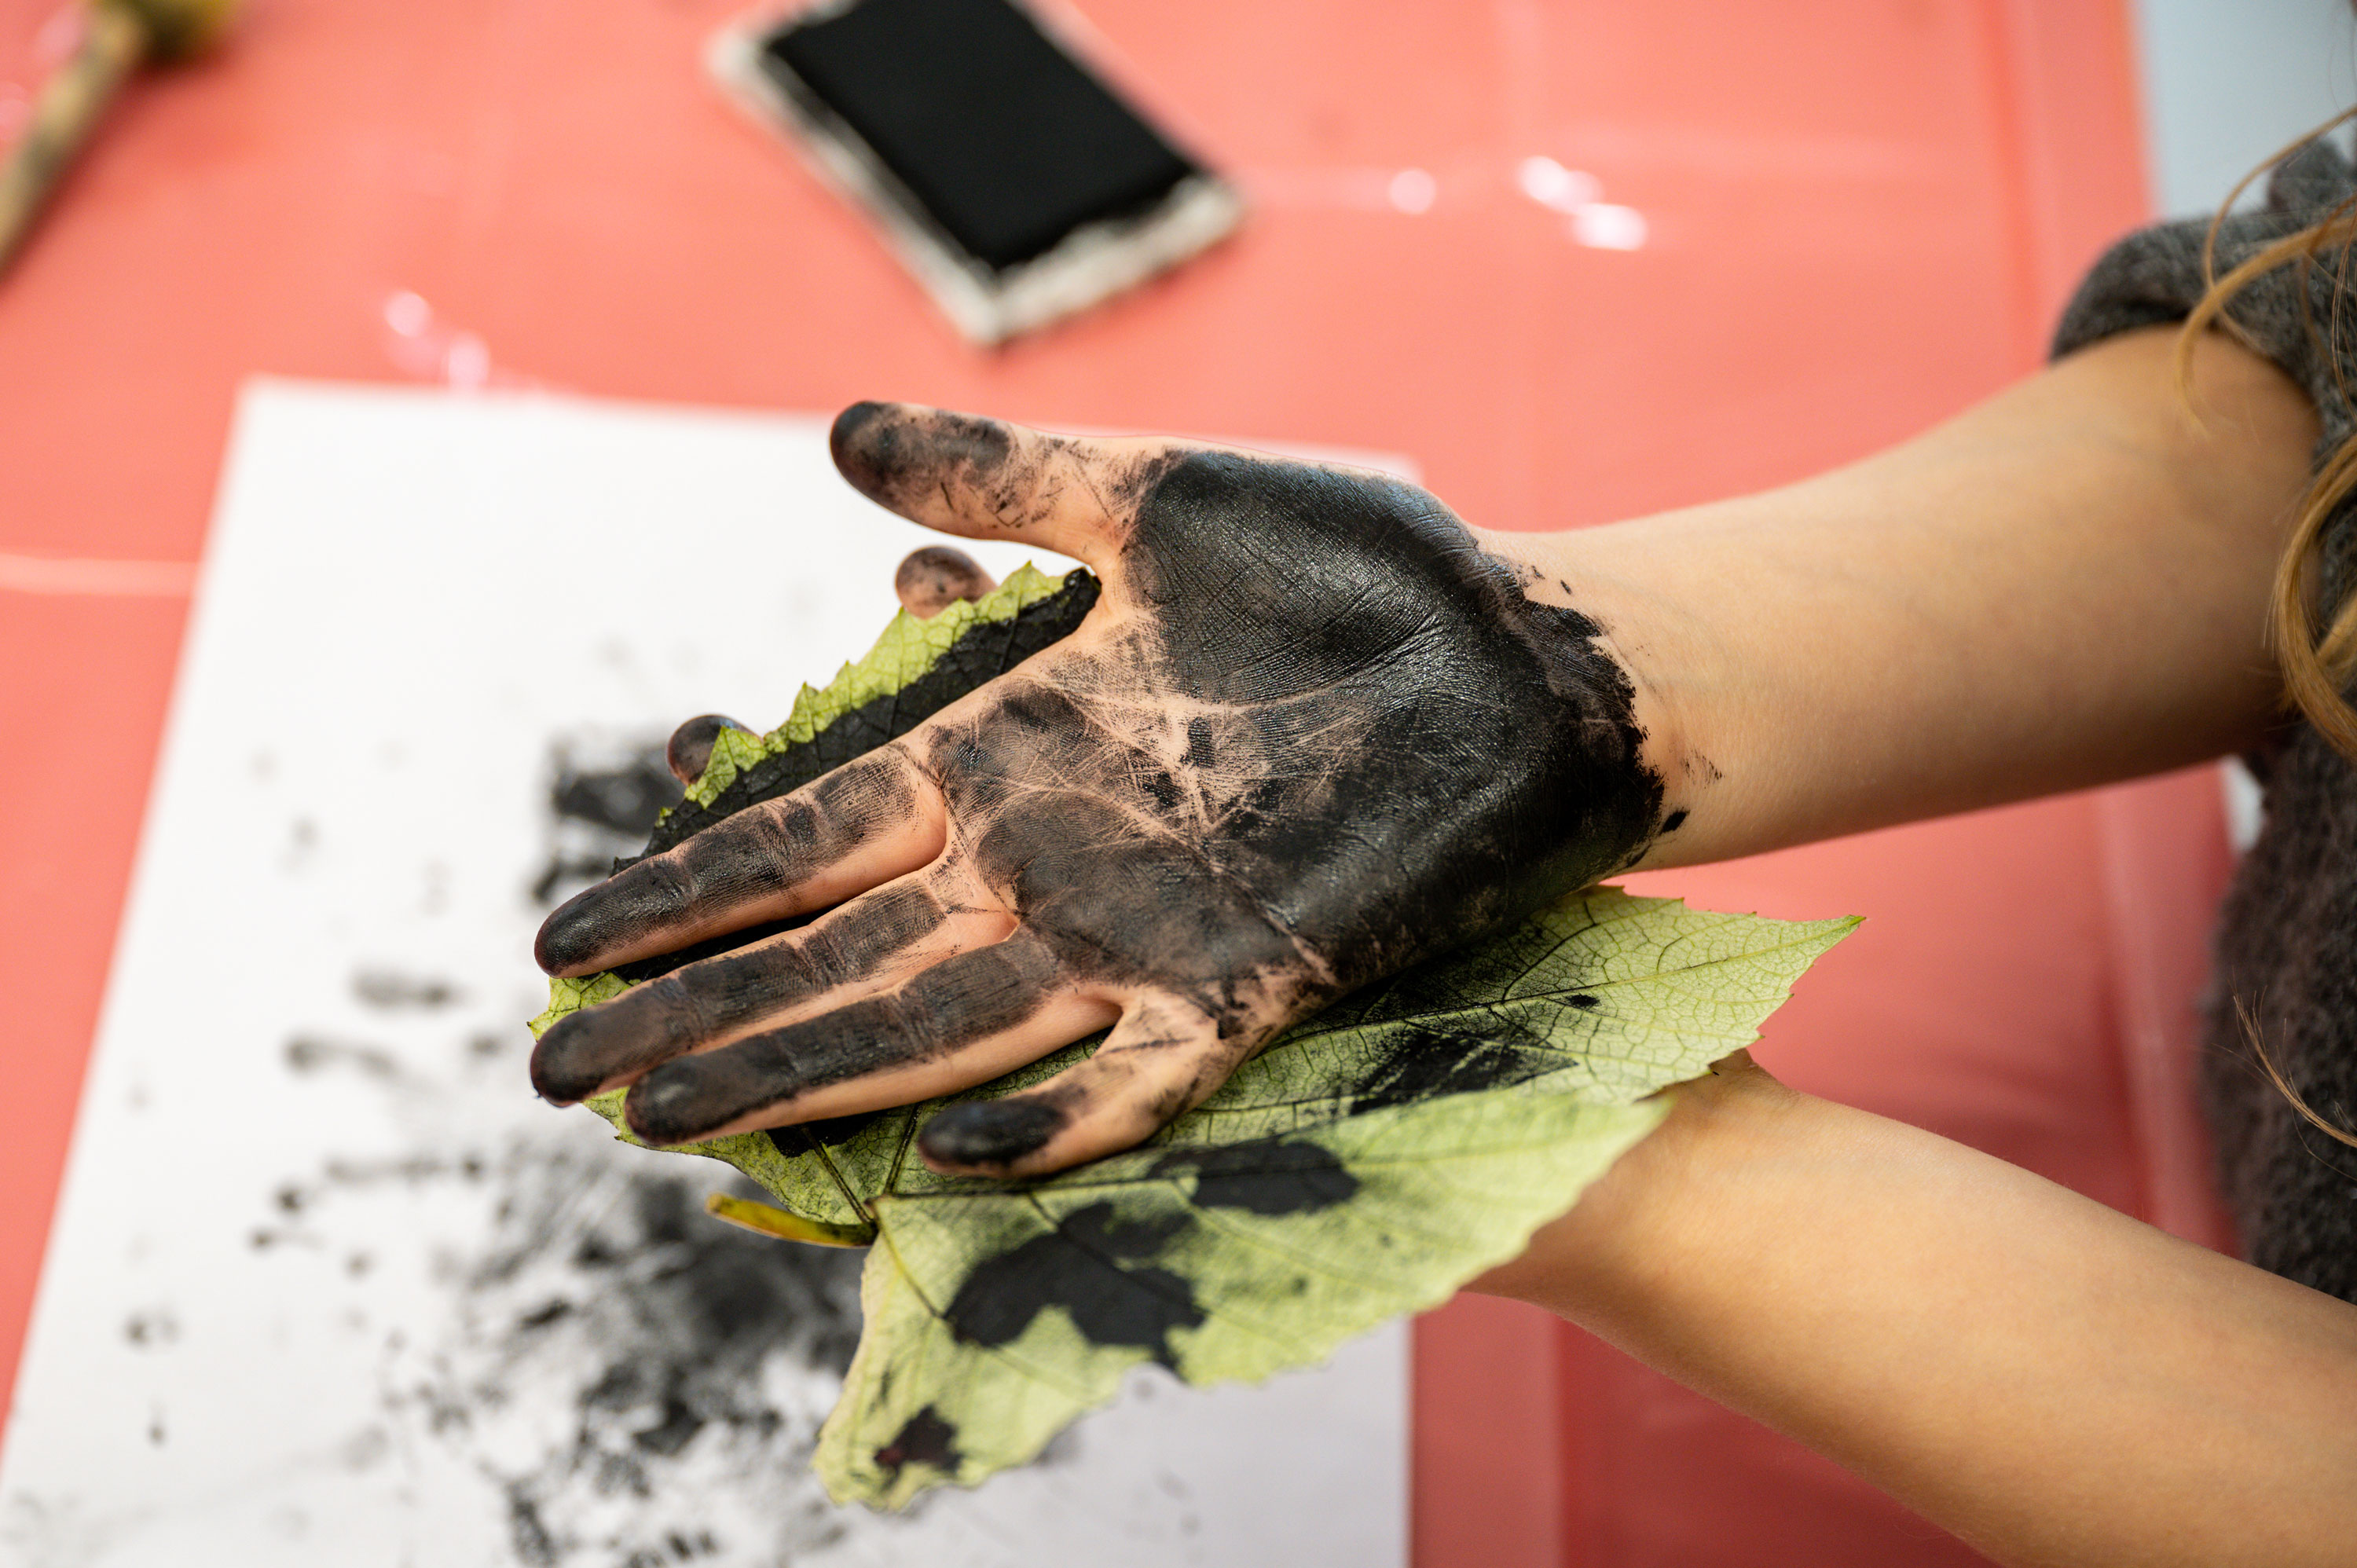 A close-up on a participants hand covered in black ink holding a leaf covered in ink